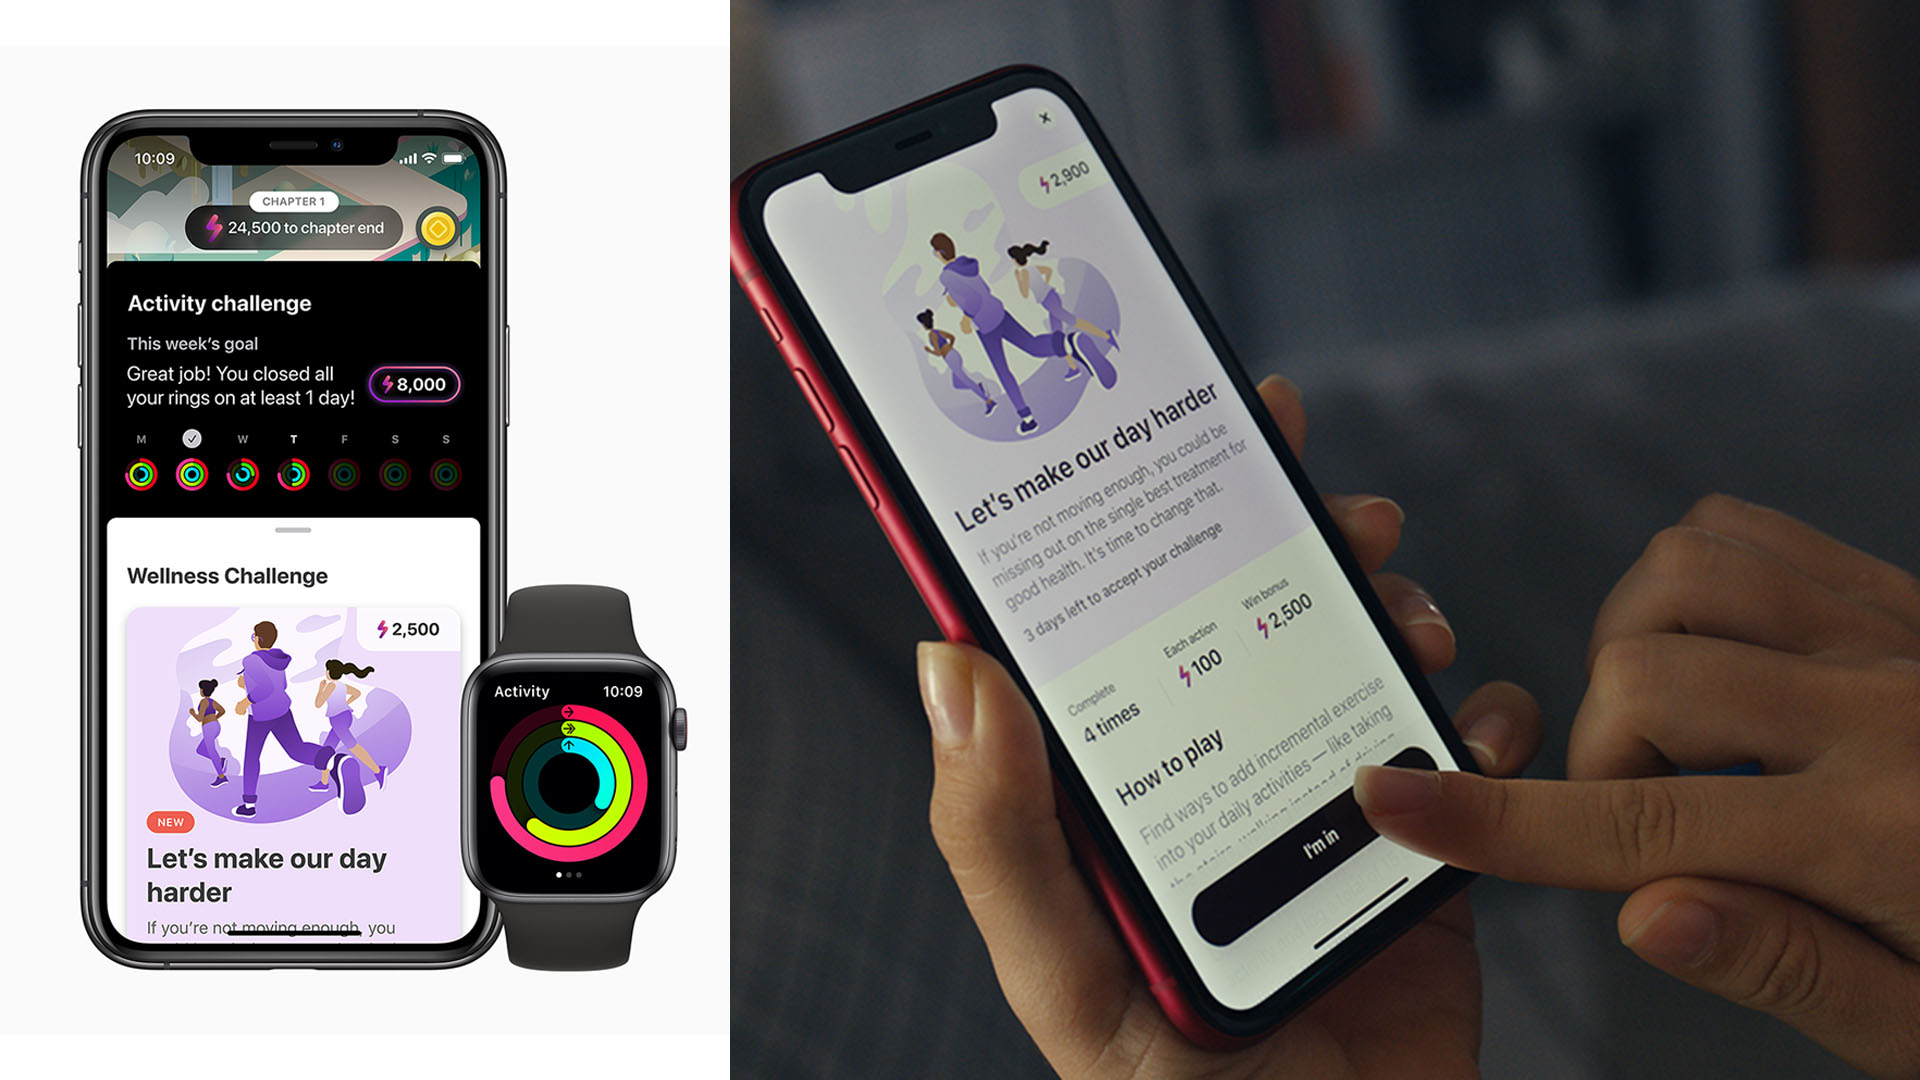 How To Earn $380 In Vouchers By Staying Healthy With A New App By Apple & Health Promotion Board